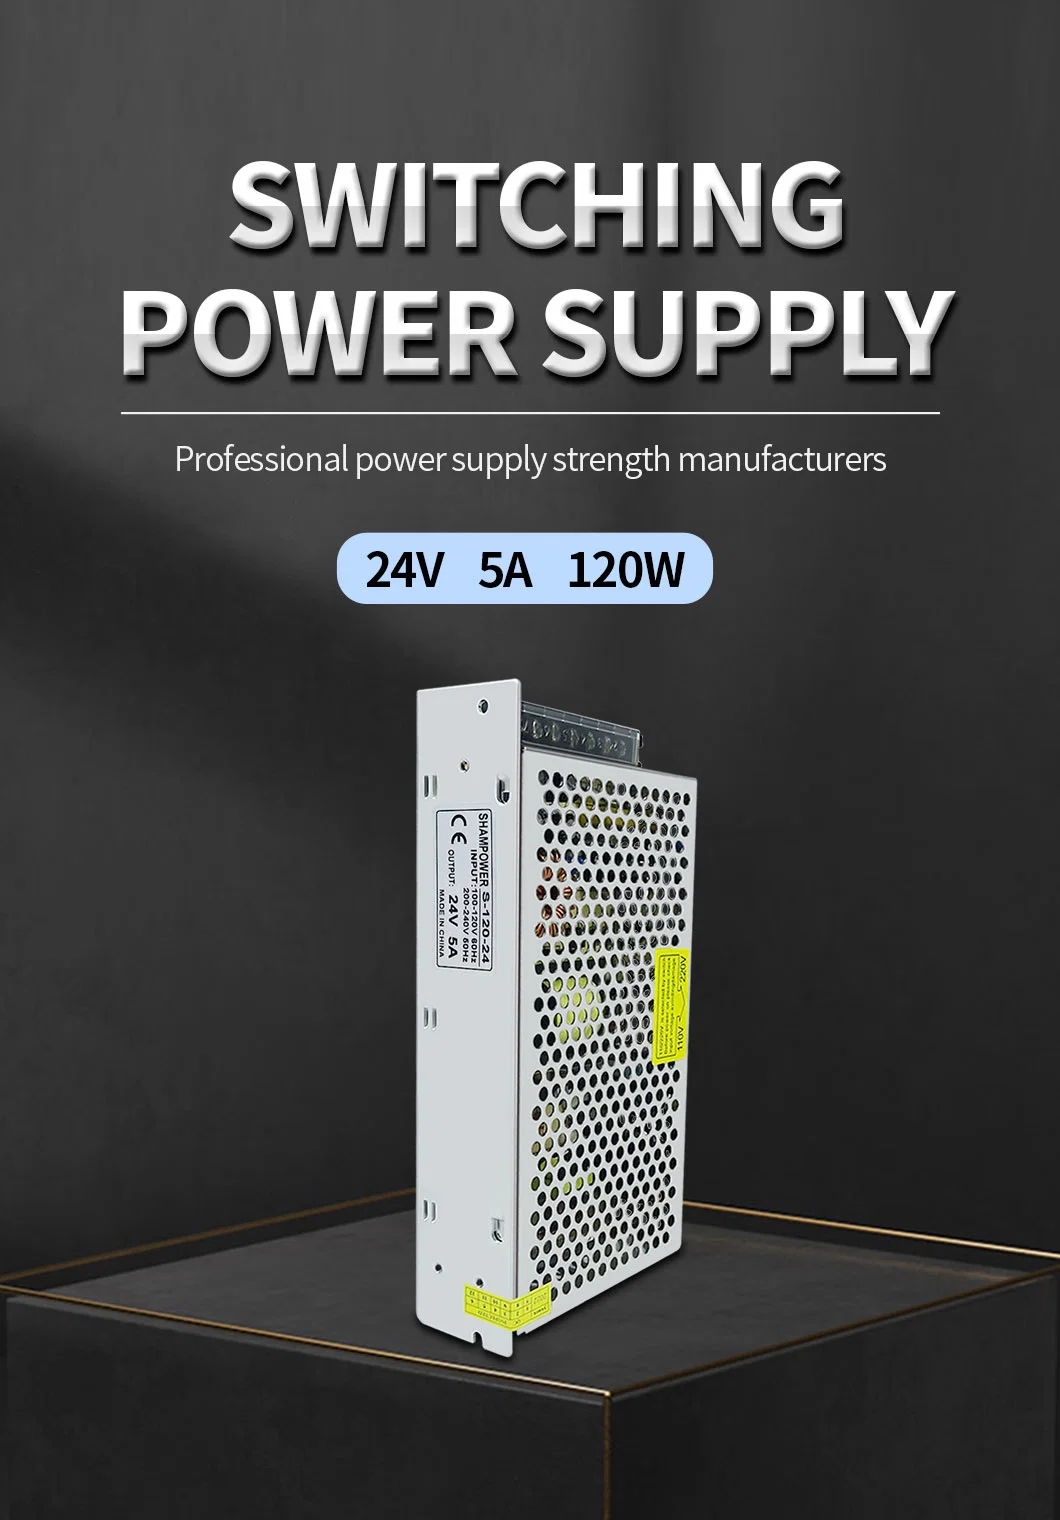 24V 5A 120W Switching Power Supply for Reserved for Printer